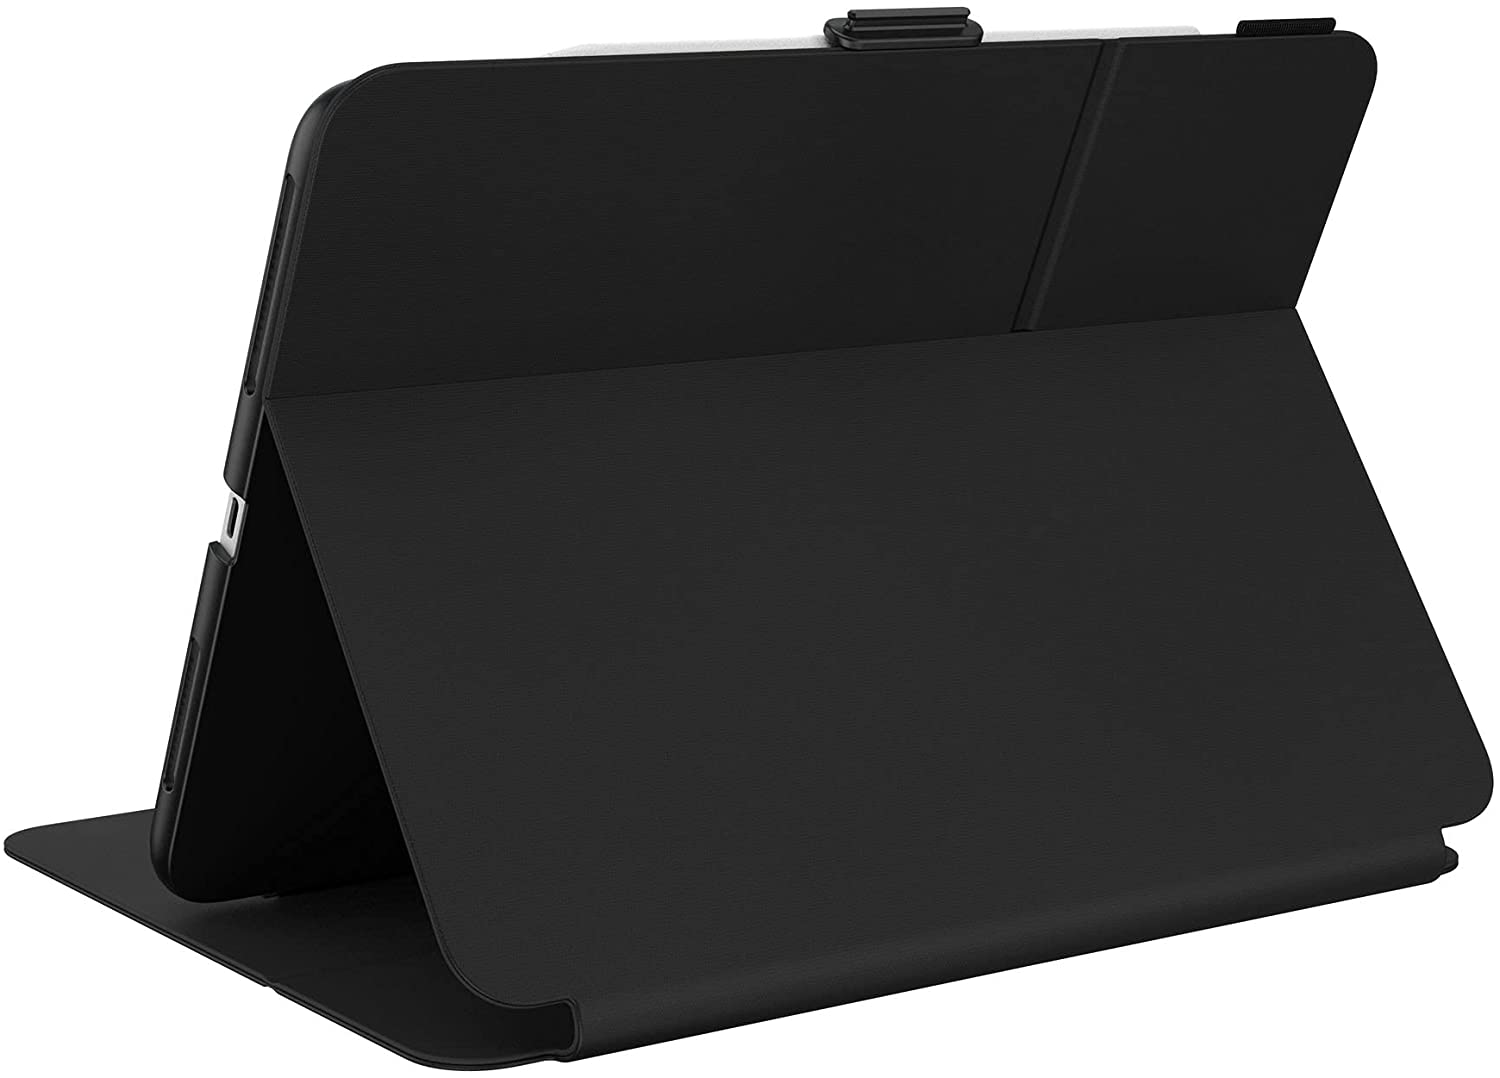 Speck Balance Folio iPad Air (2020)/iPad Pro 11” (2018-2021) Case $23.56 + free shipping w/ Prime or on orders over $25